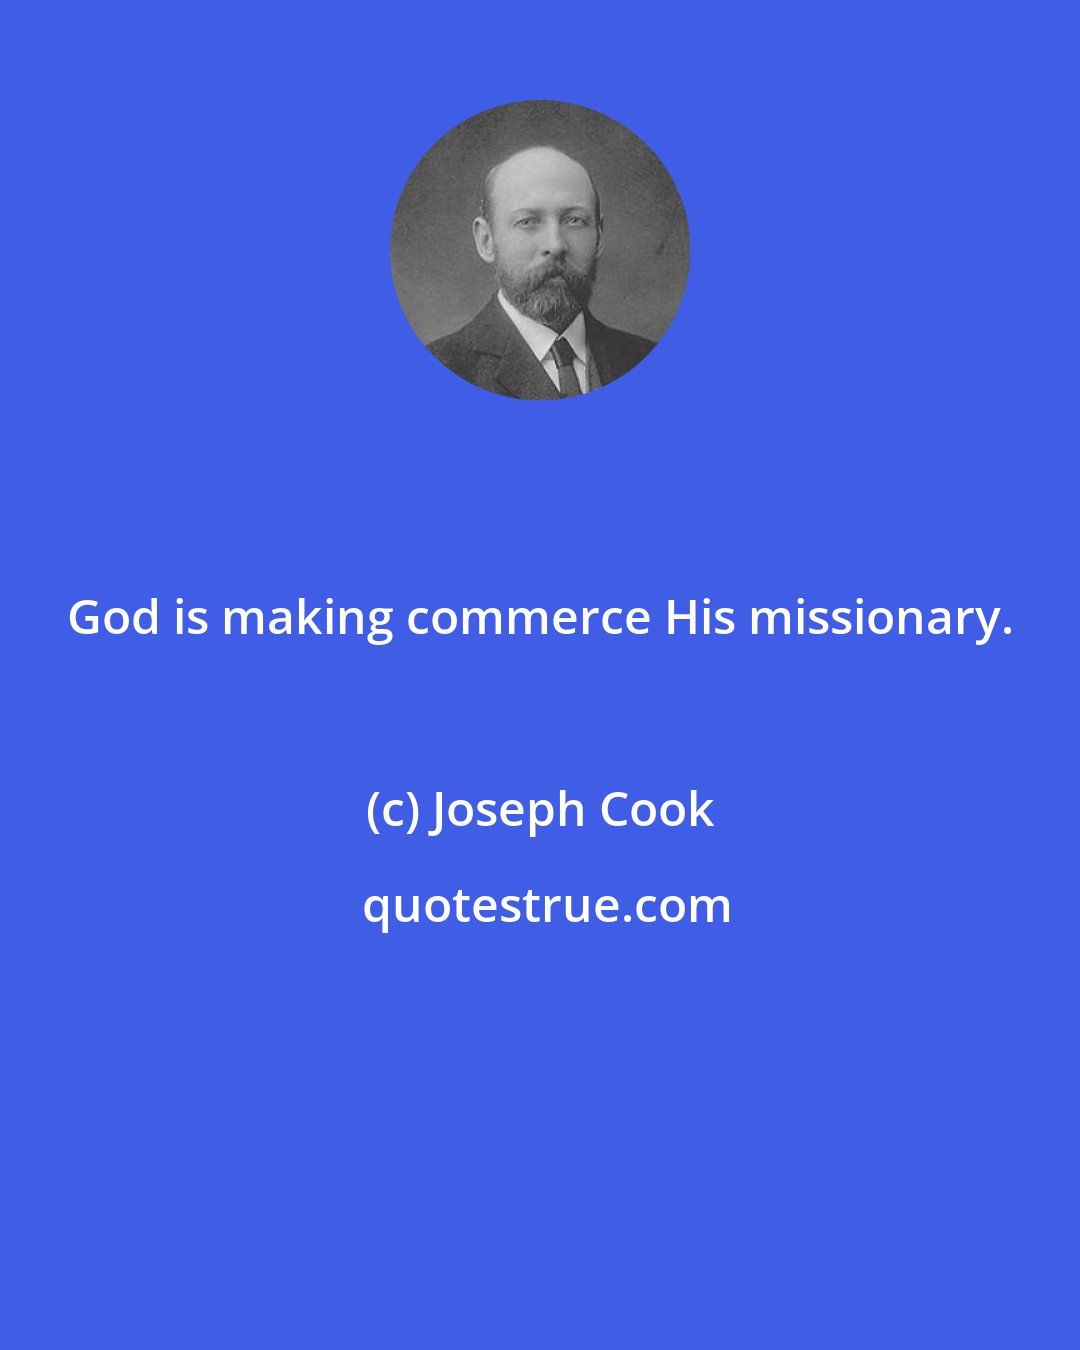 Joseph Cook: God is making commerce His missionary.